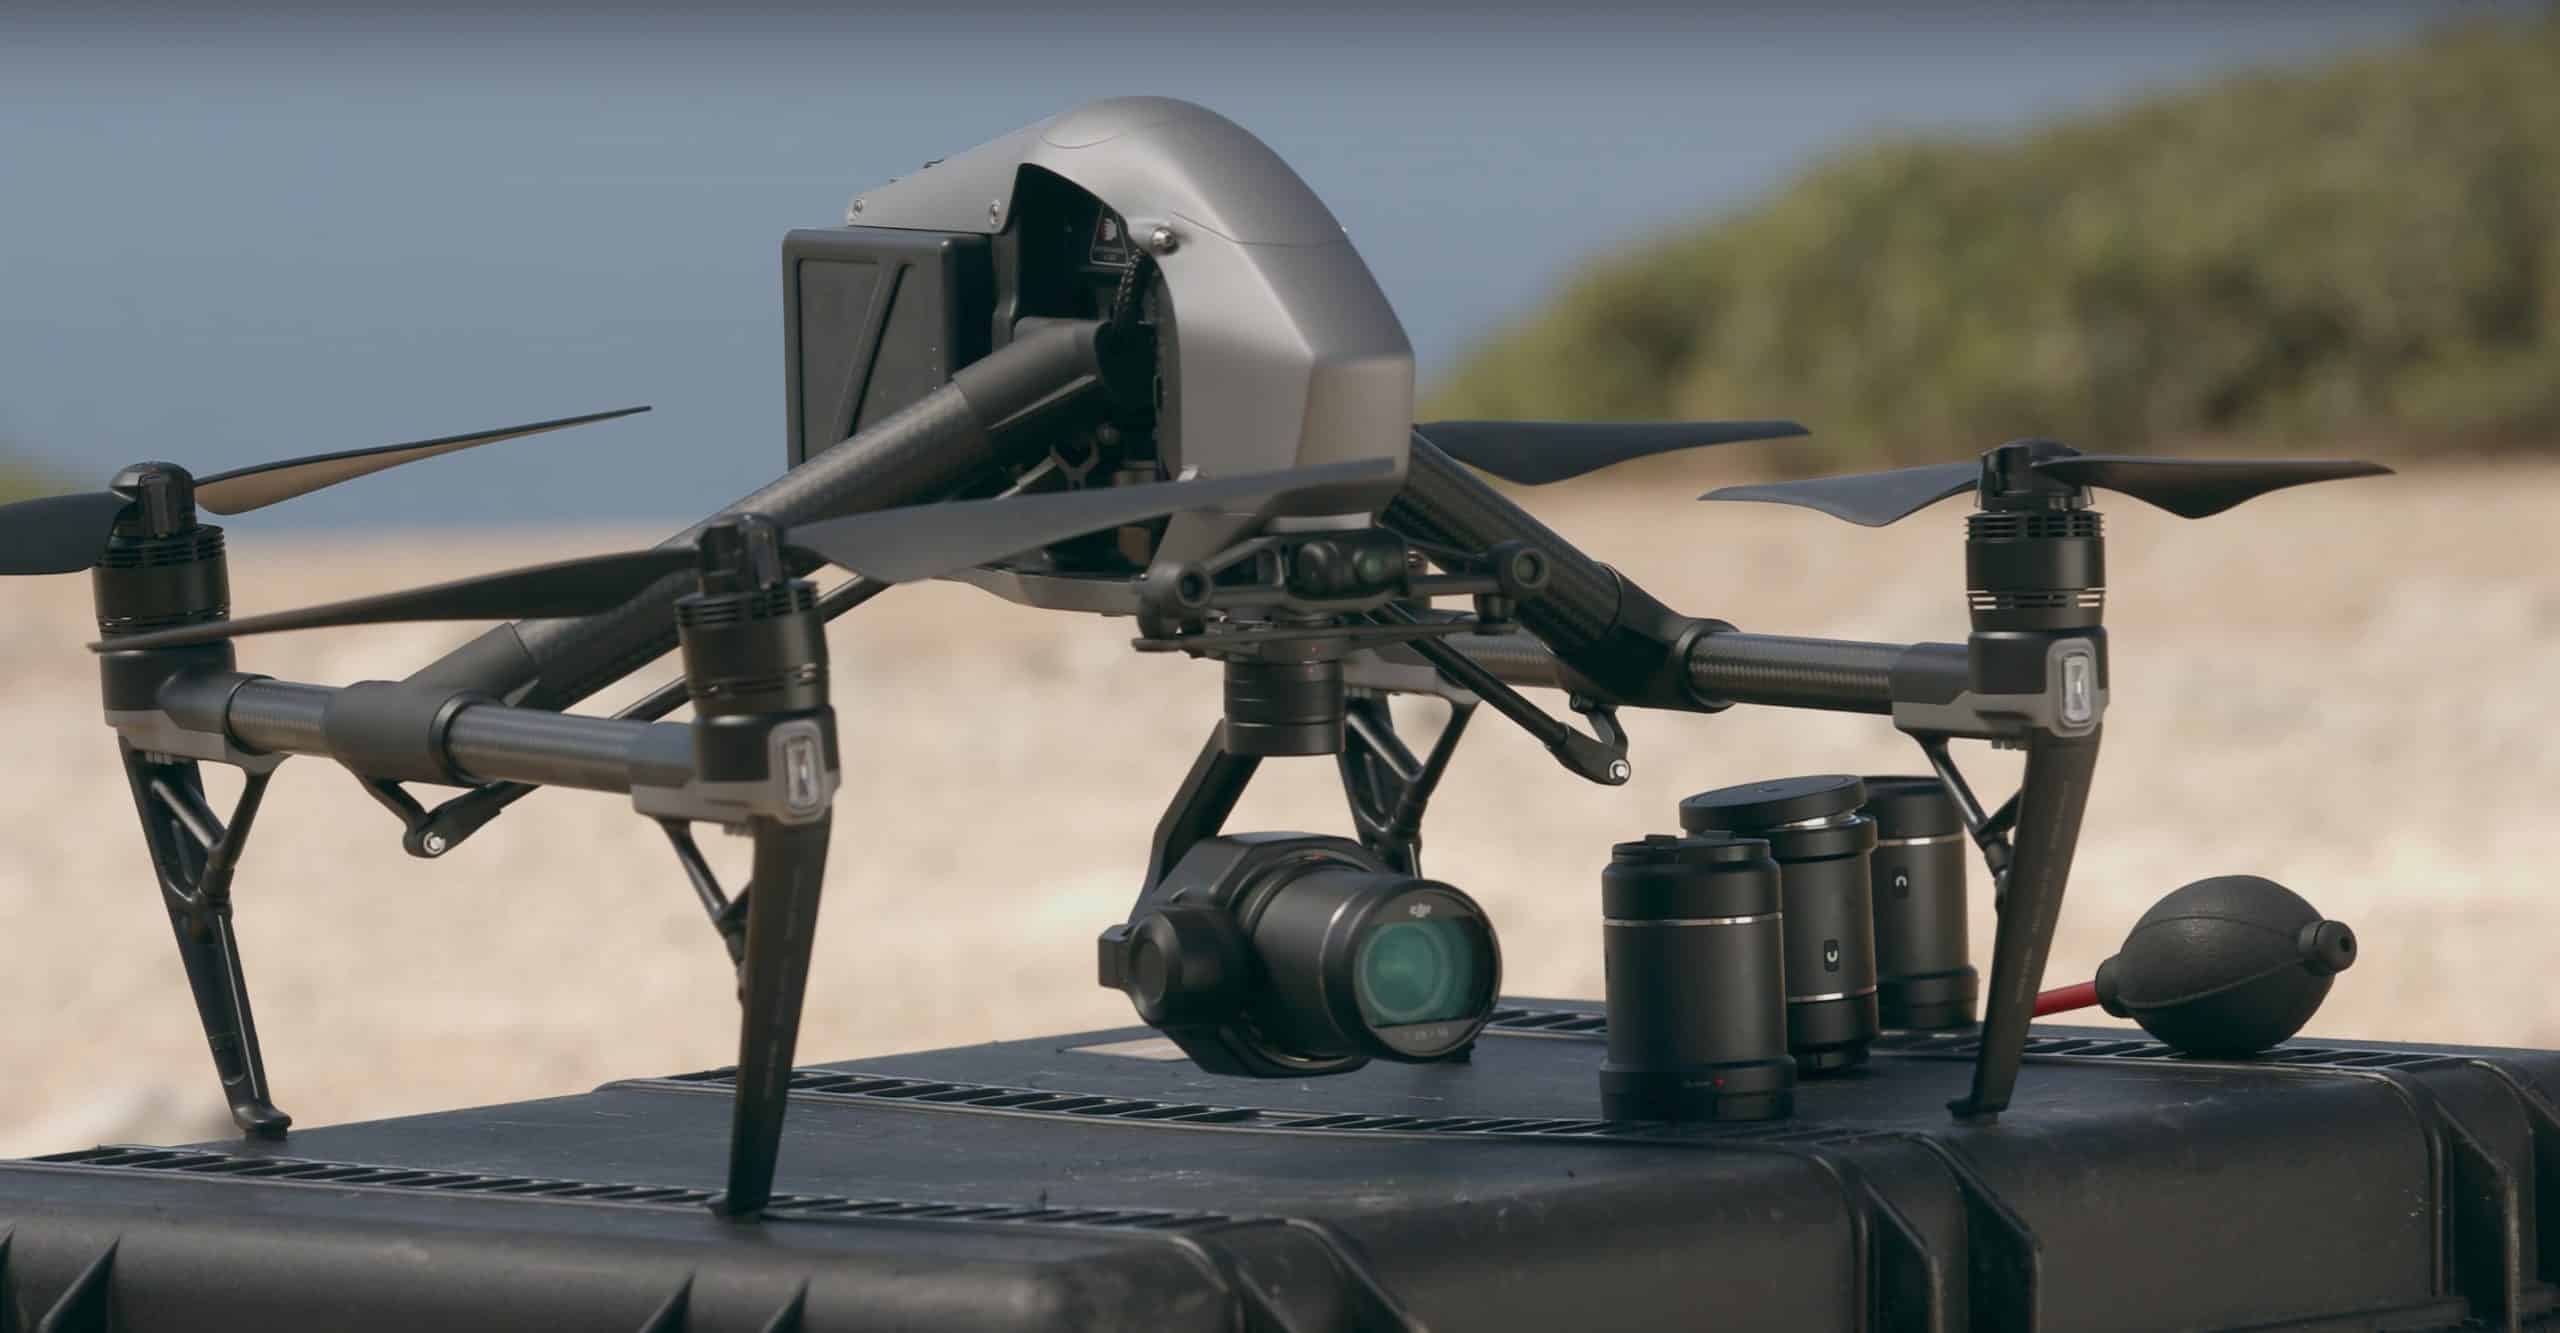 Dji Inspire 2 X7 - Frenchidrone - Fabricant de drones, Formations